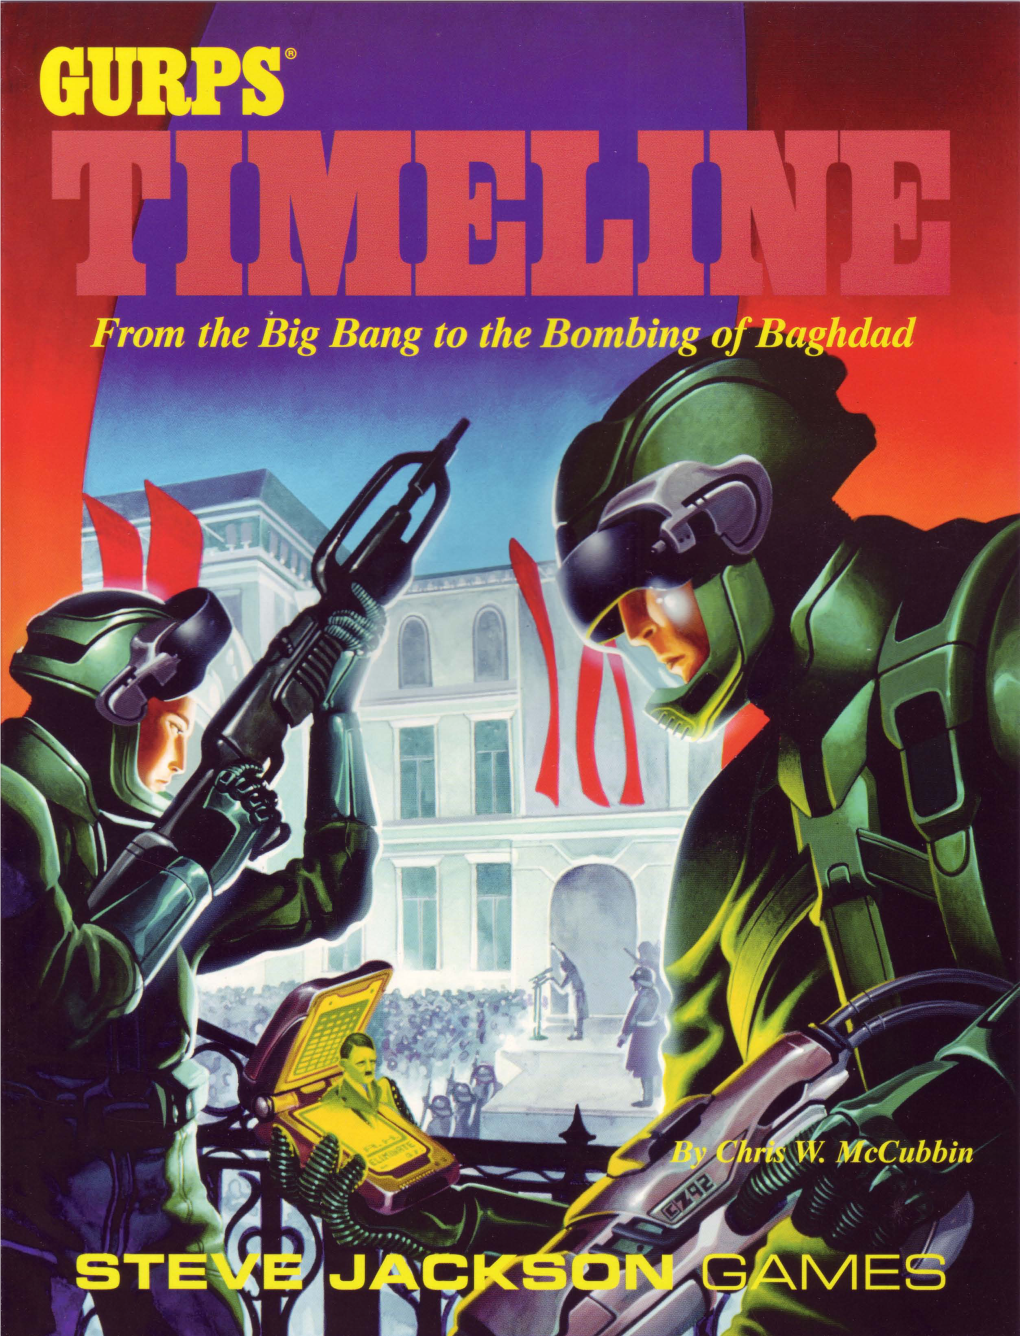 GURPS Classic Timeline